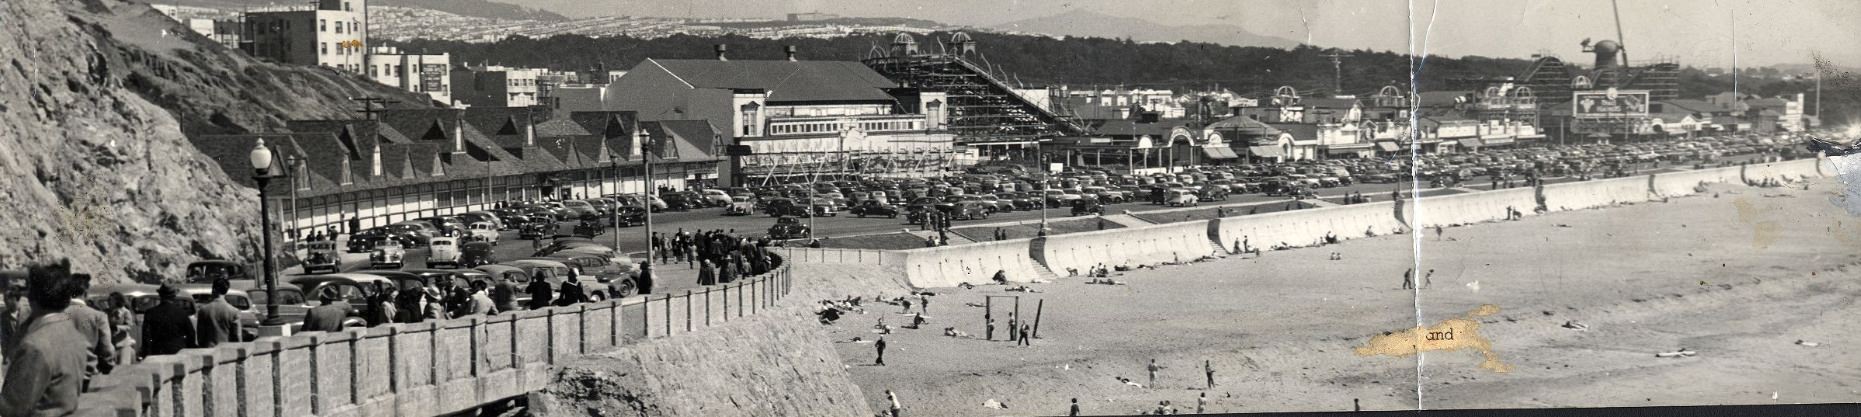 Ocean Beach near the Cliff House with Playland in the background, 1946